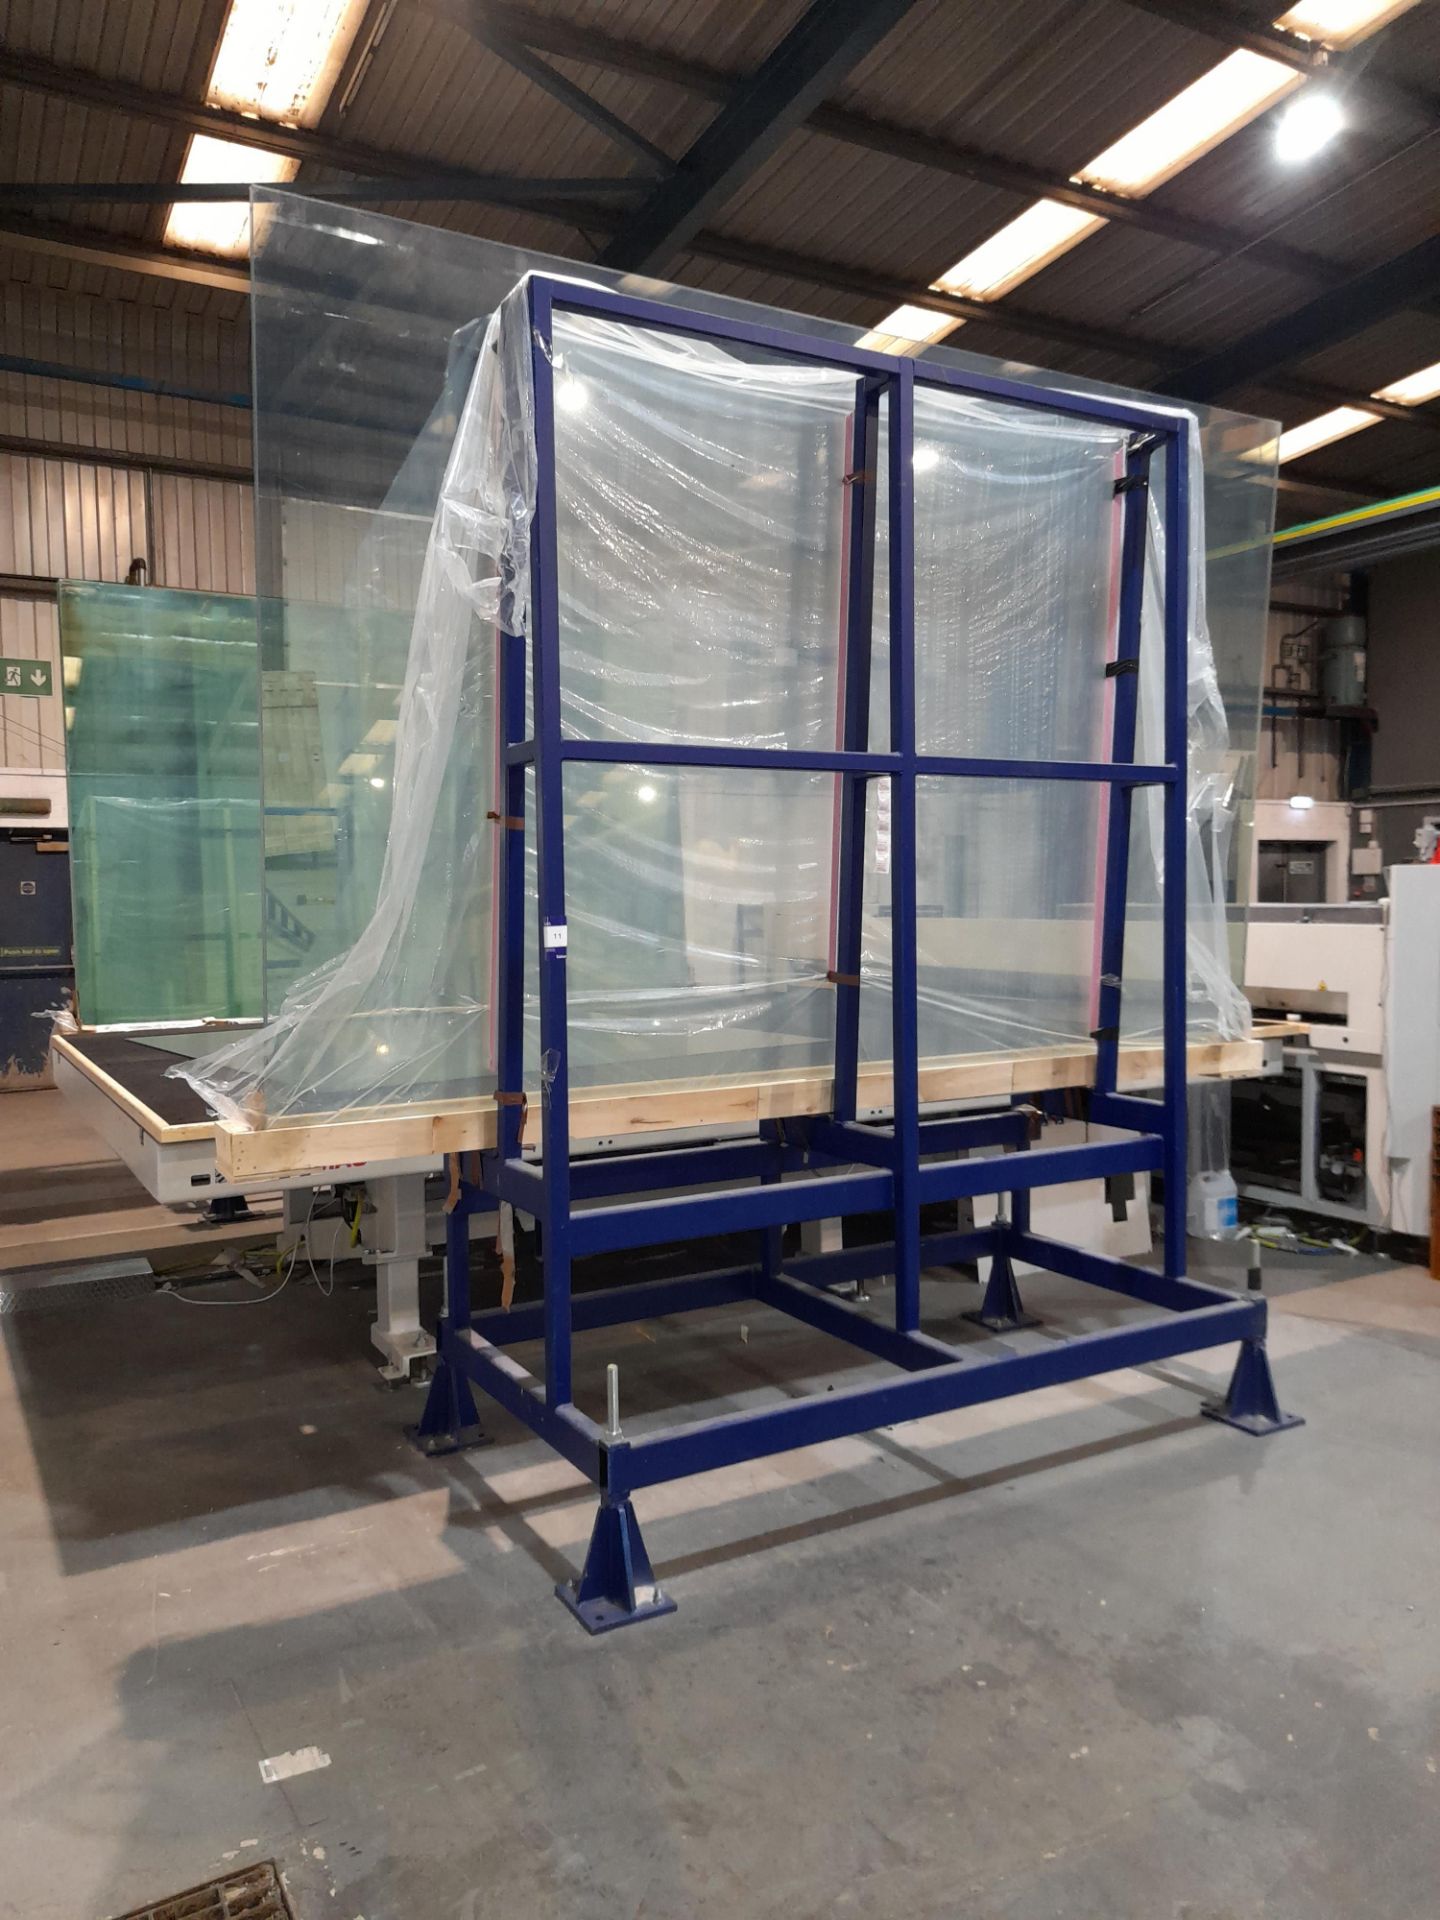 2 x Sheet Glass stock stillage (Contents Included)